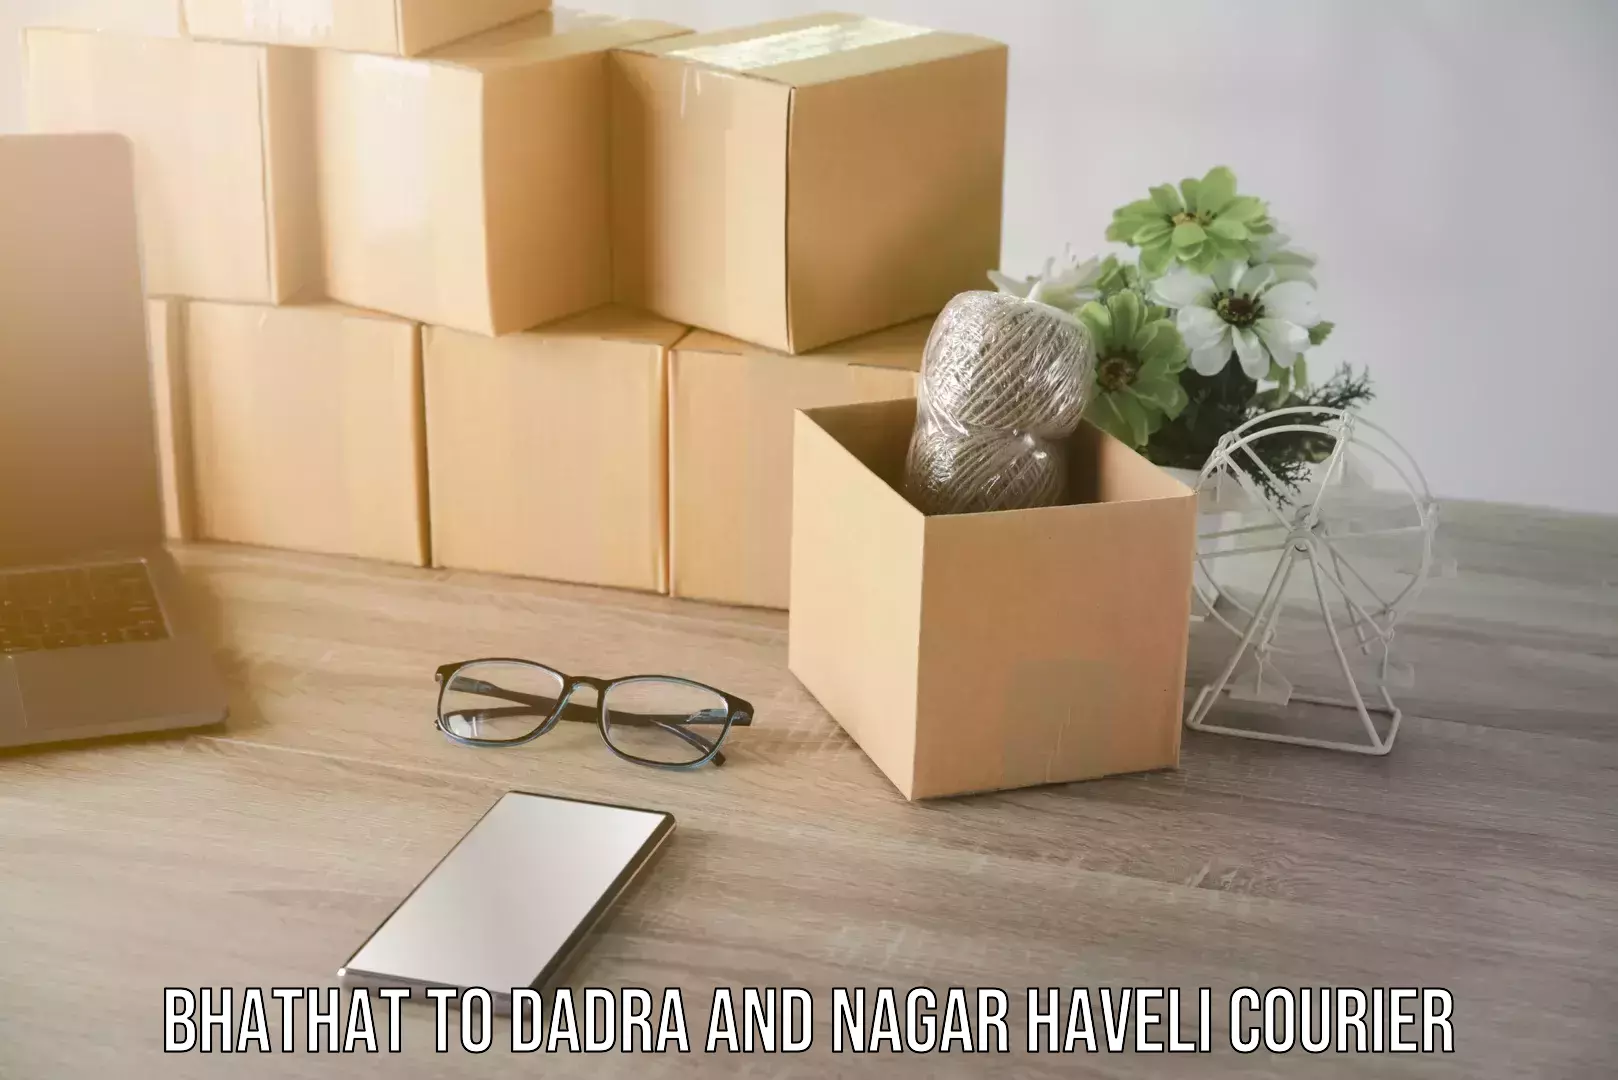 International courier networks Bhathat to Dadra and Nagar Haveli